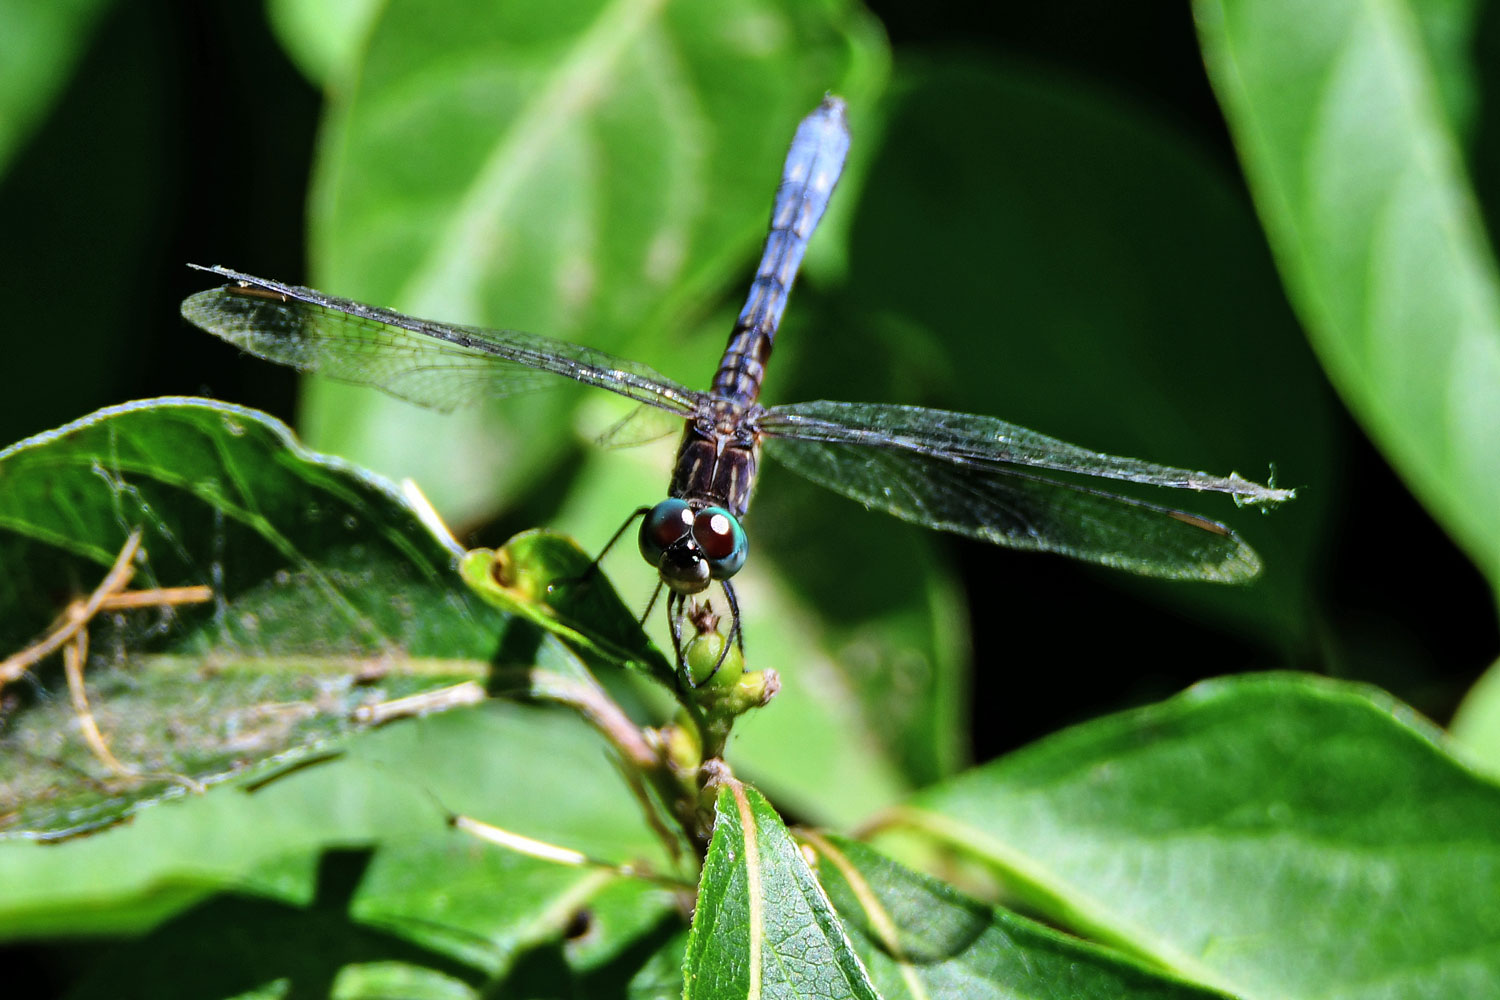 A dragonfly on green leaves